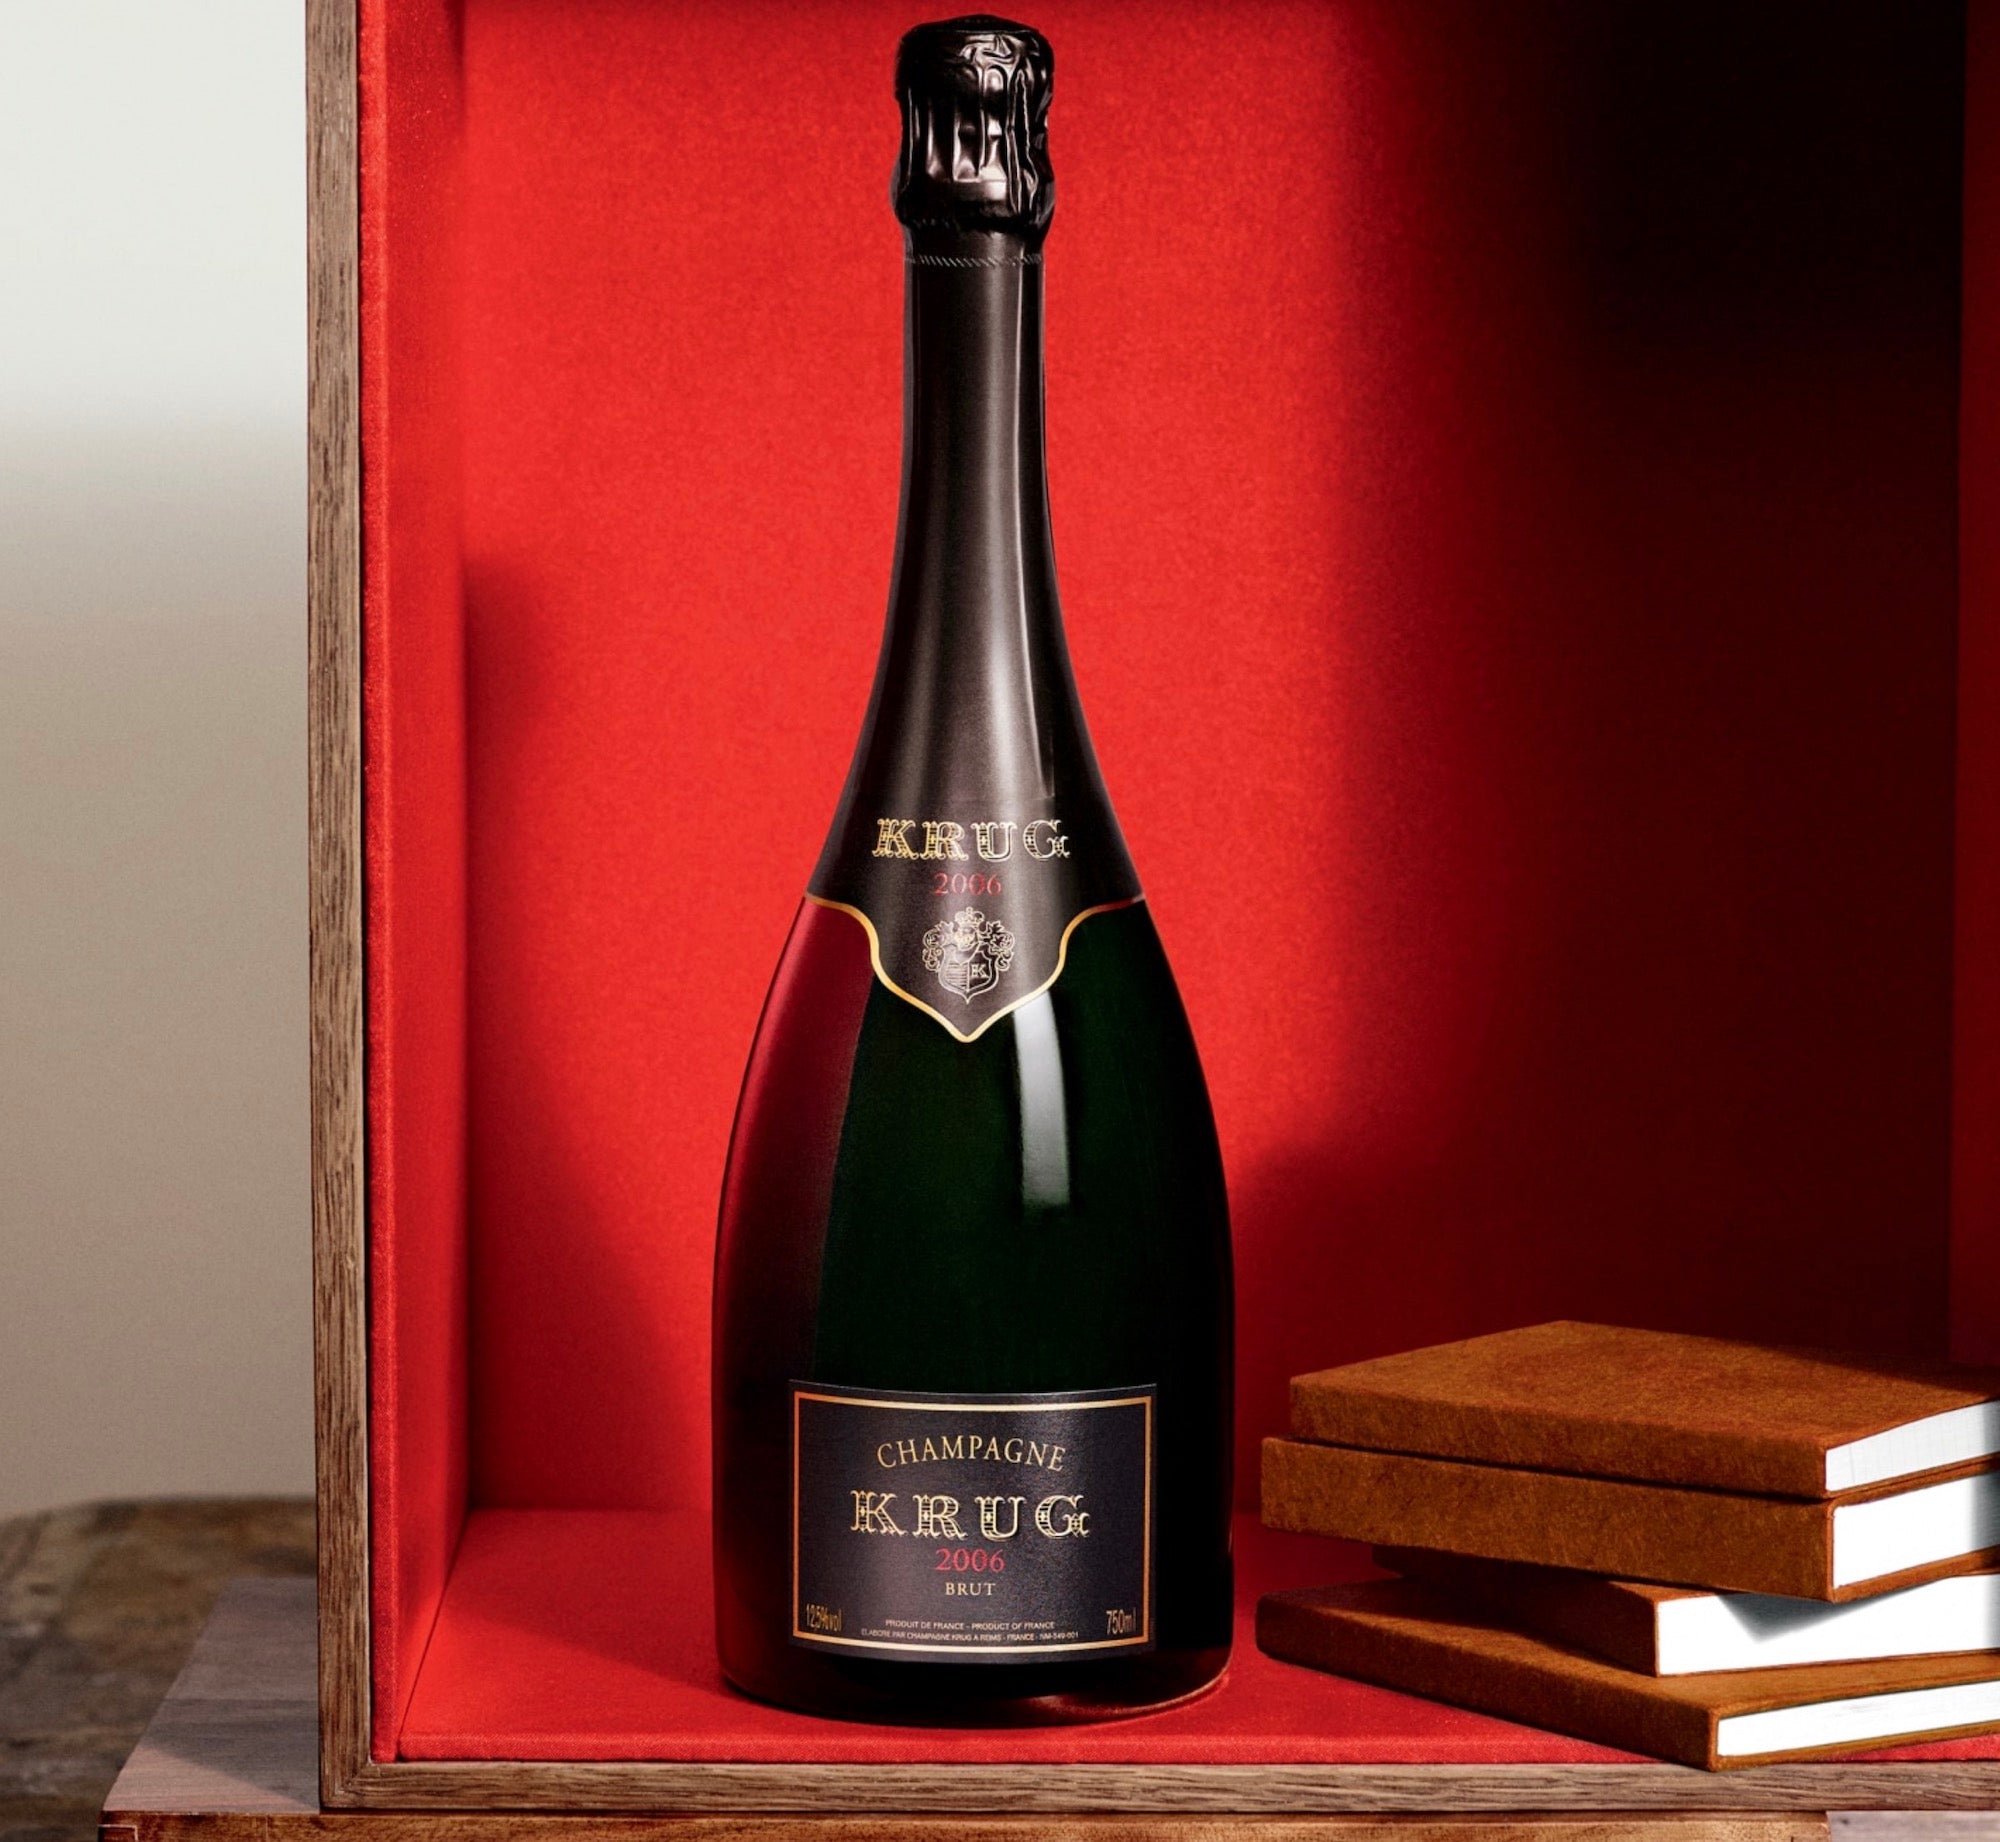 Champagne Krug Unveils 170th Edition of Grande Cuvée and the 26th